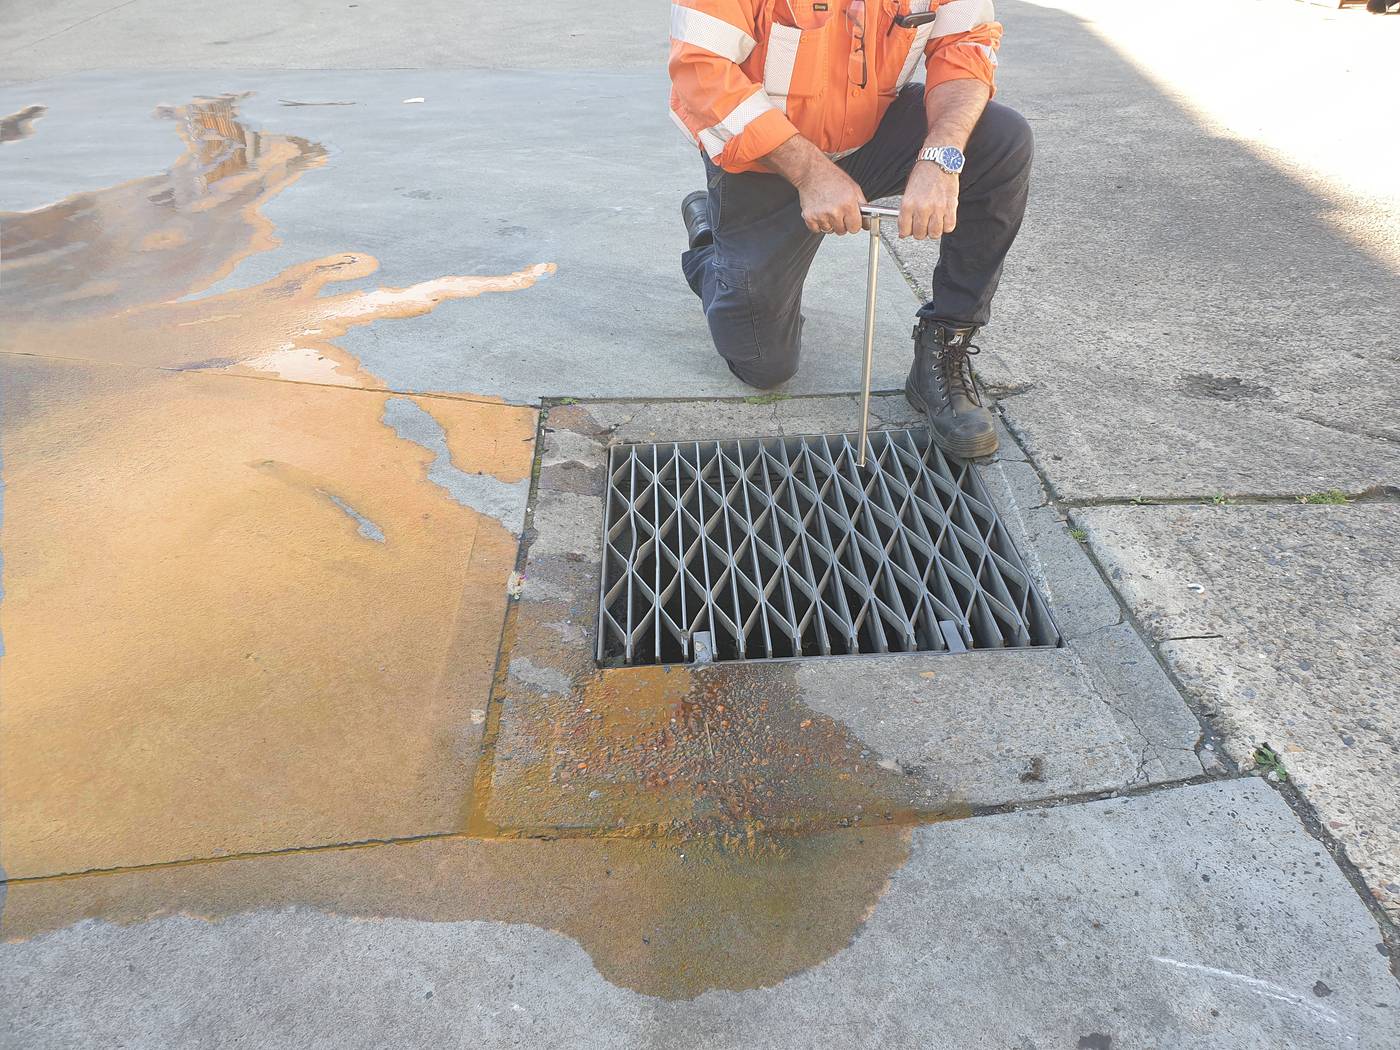 A man is engaging the DrainSAFE unit by turning the handle to isolate the storm drain from the spill that has occurred in a parking lot